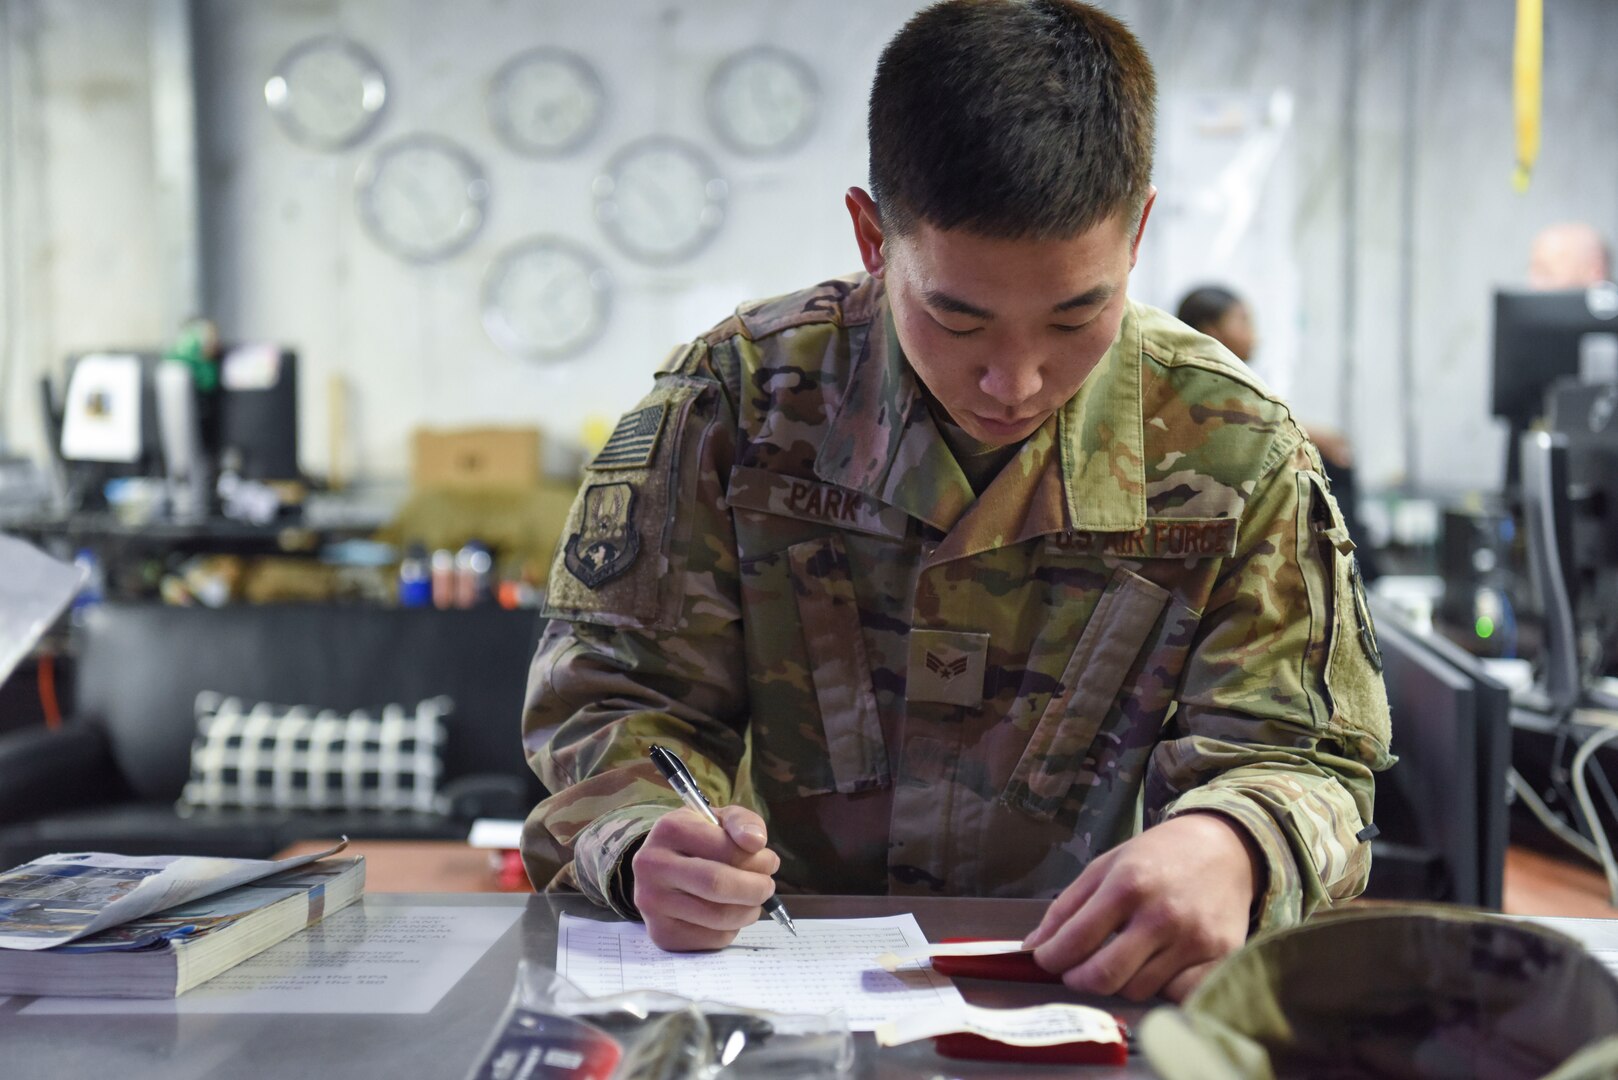 Senior Airman Minkyu Park, 380th Expeditionary Logistics Readiness Squadron customer service technician, checks the ordering number while issuing supplies at Al Dhafra Air Base, United Arab Emirates, Feb. 11, 2019.